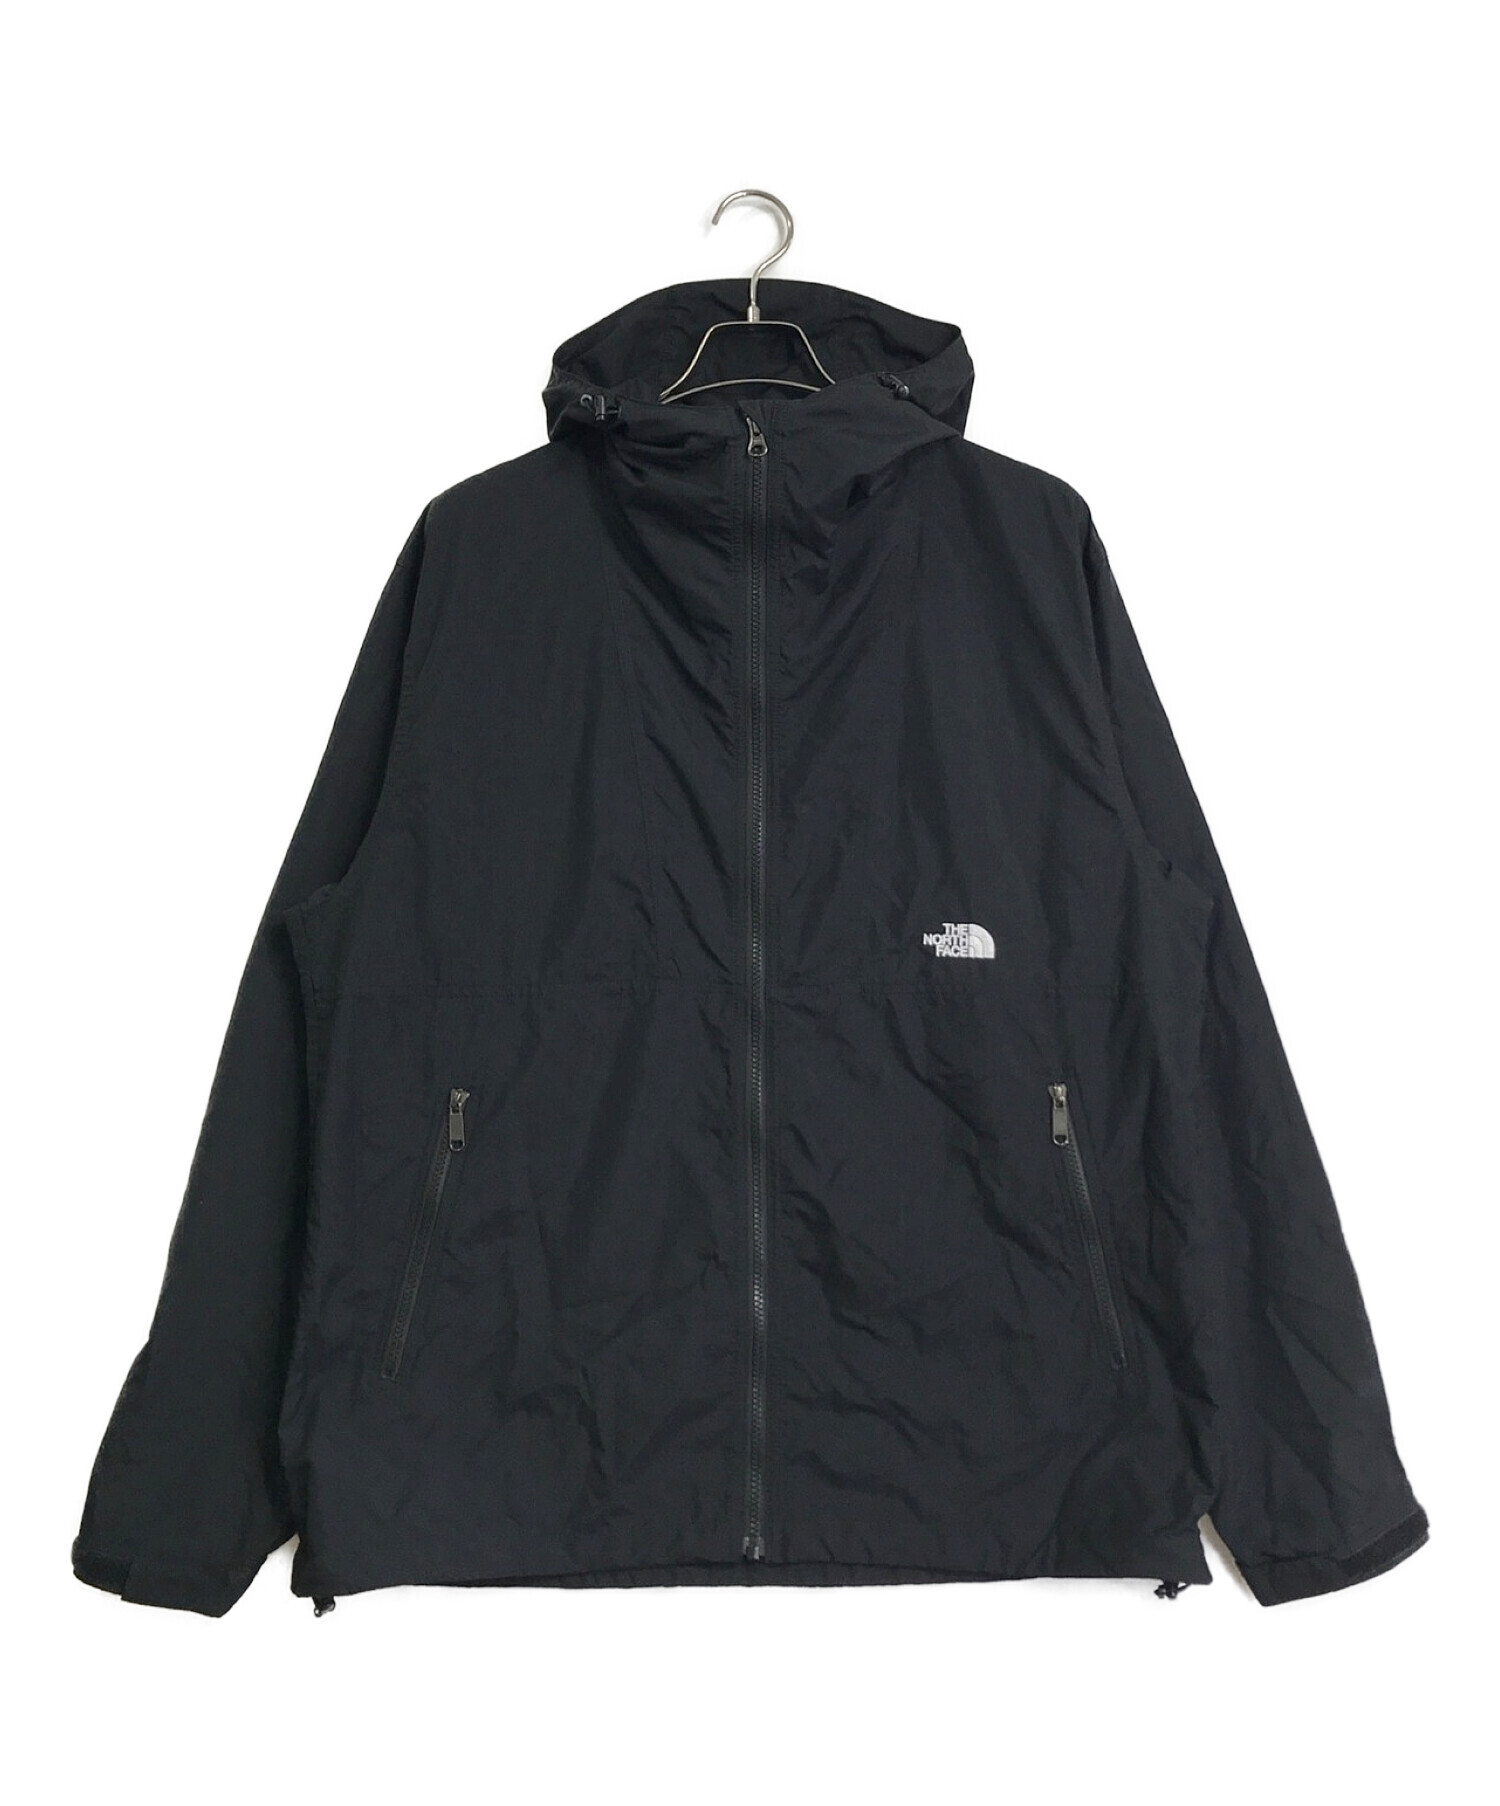 THE NORTH FACE コンパクトジャケット XL - パーカー